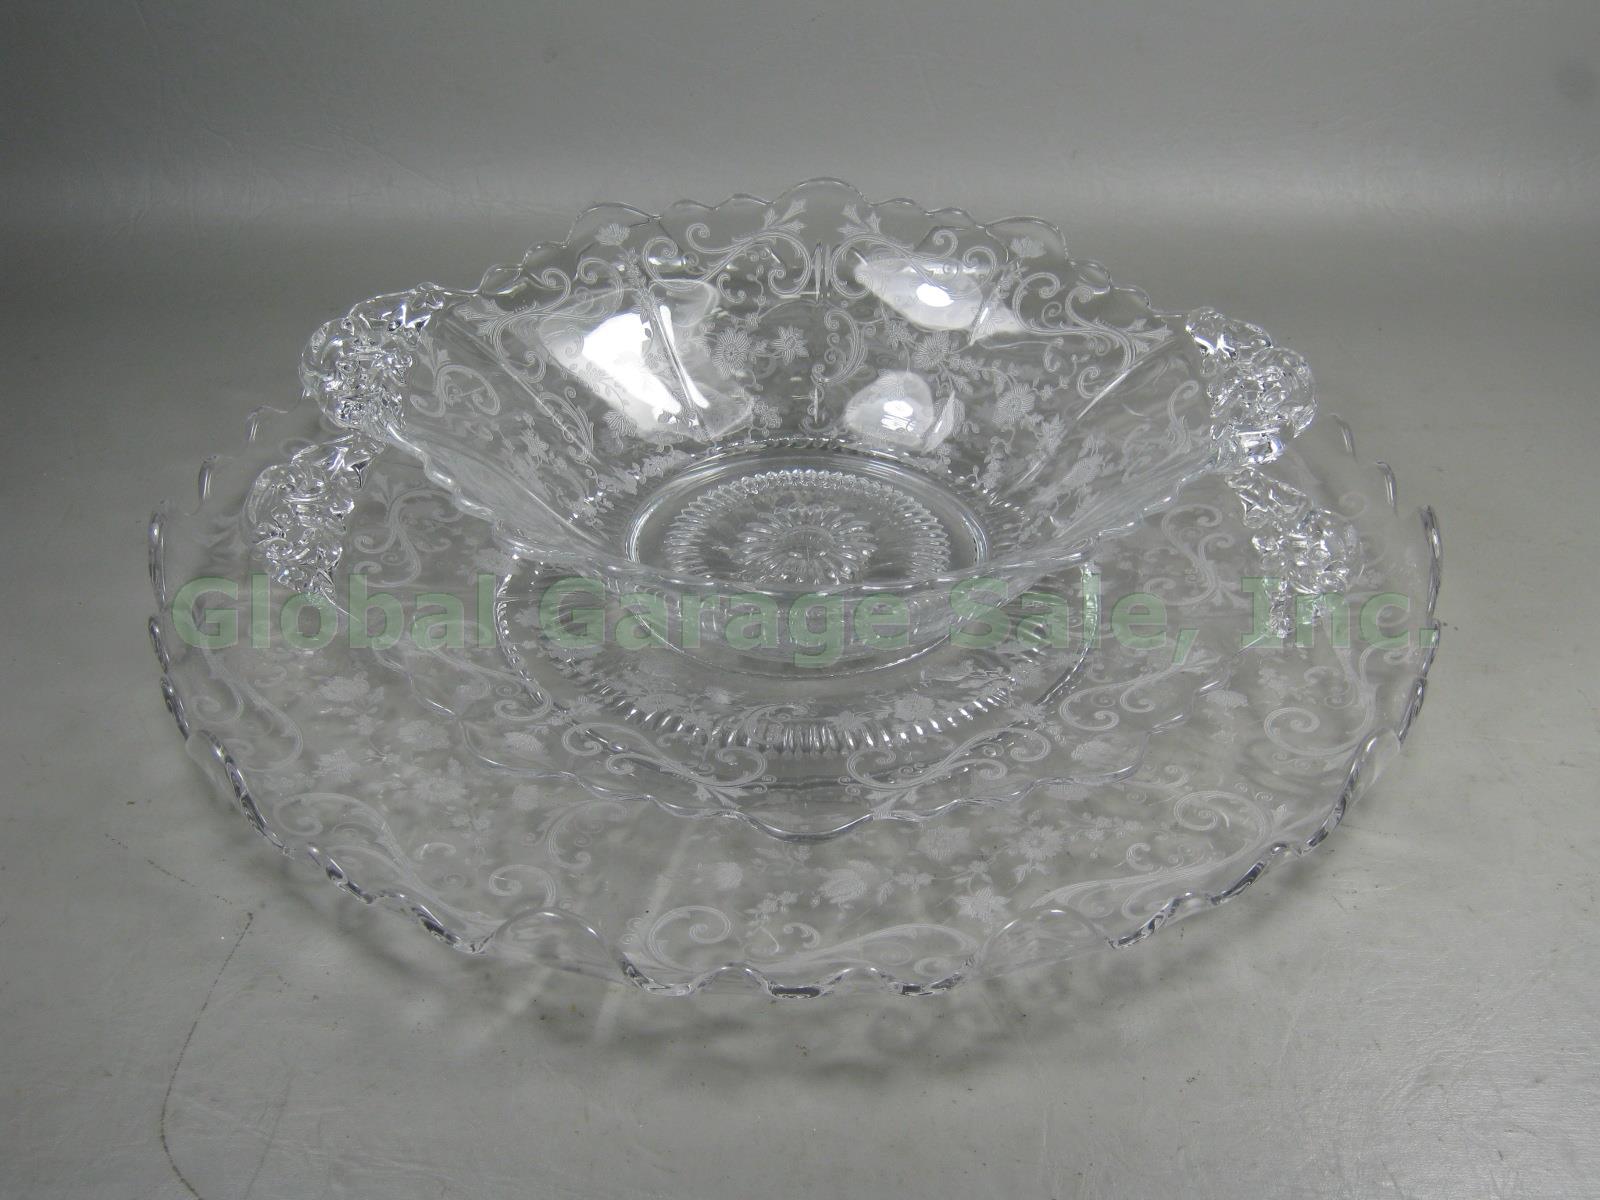 Cambridge Chantilly Etched Glass Serving Bowl Dish Handled Cake Plate Platter NR